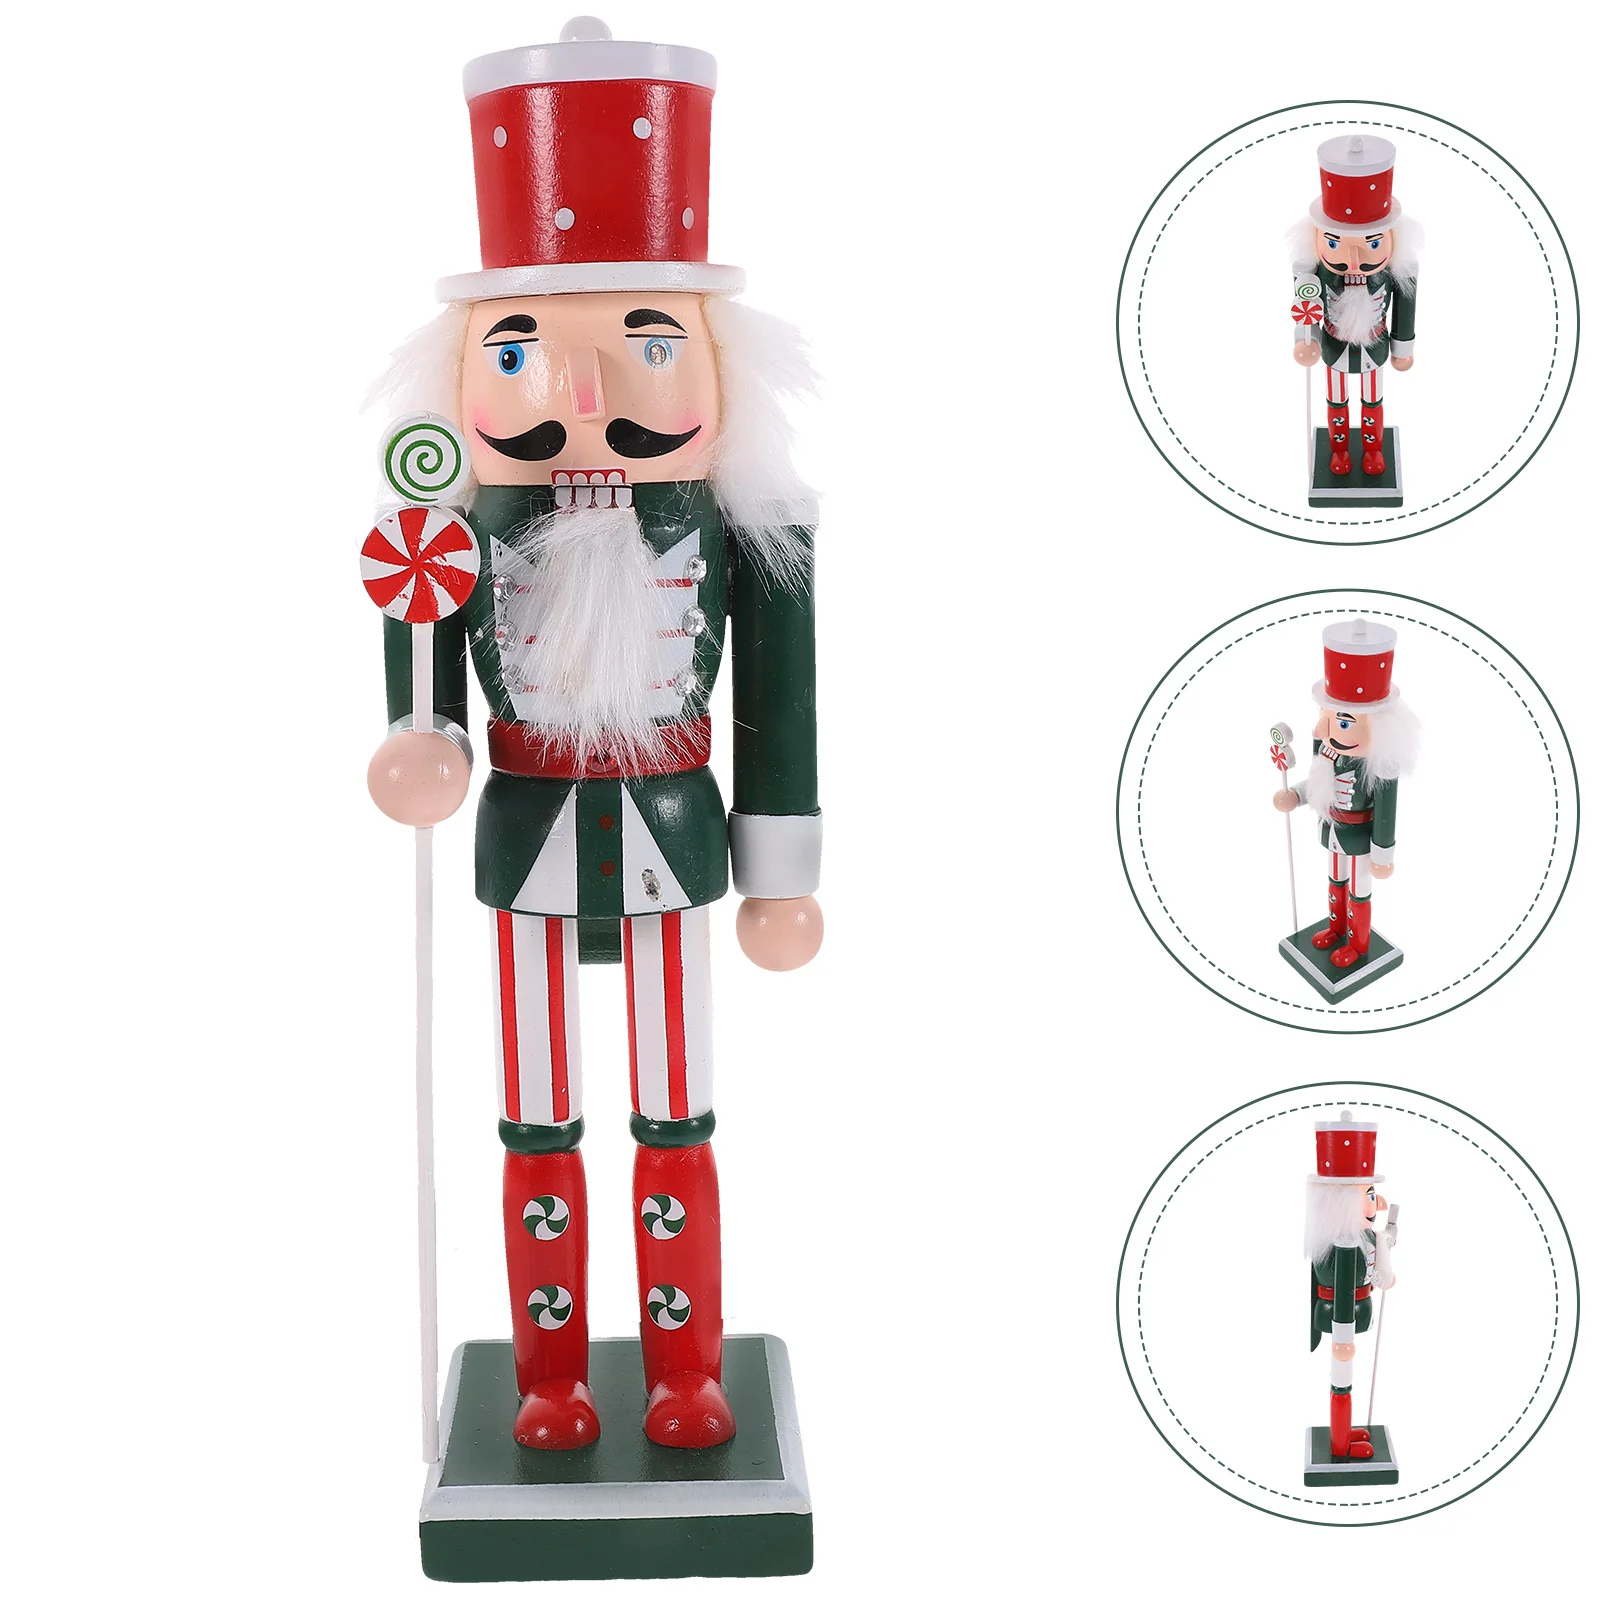 

Christmas Nutcracker Figure Soldier Doll Wooden Vintage Puppet Creative Handicrafts Gift Christmas Decorations Home Ornament